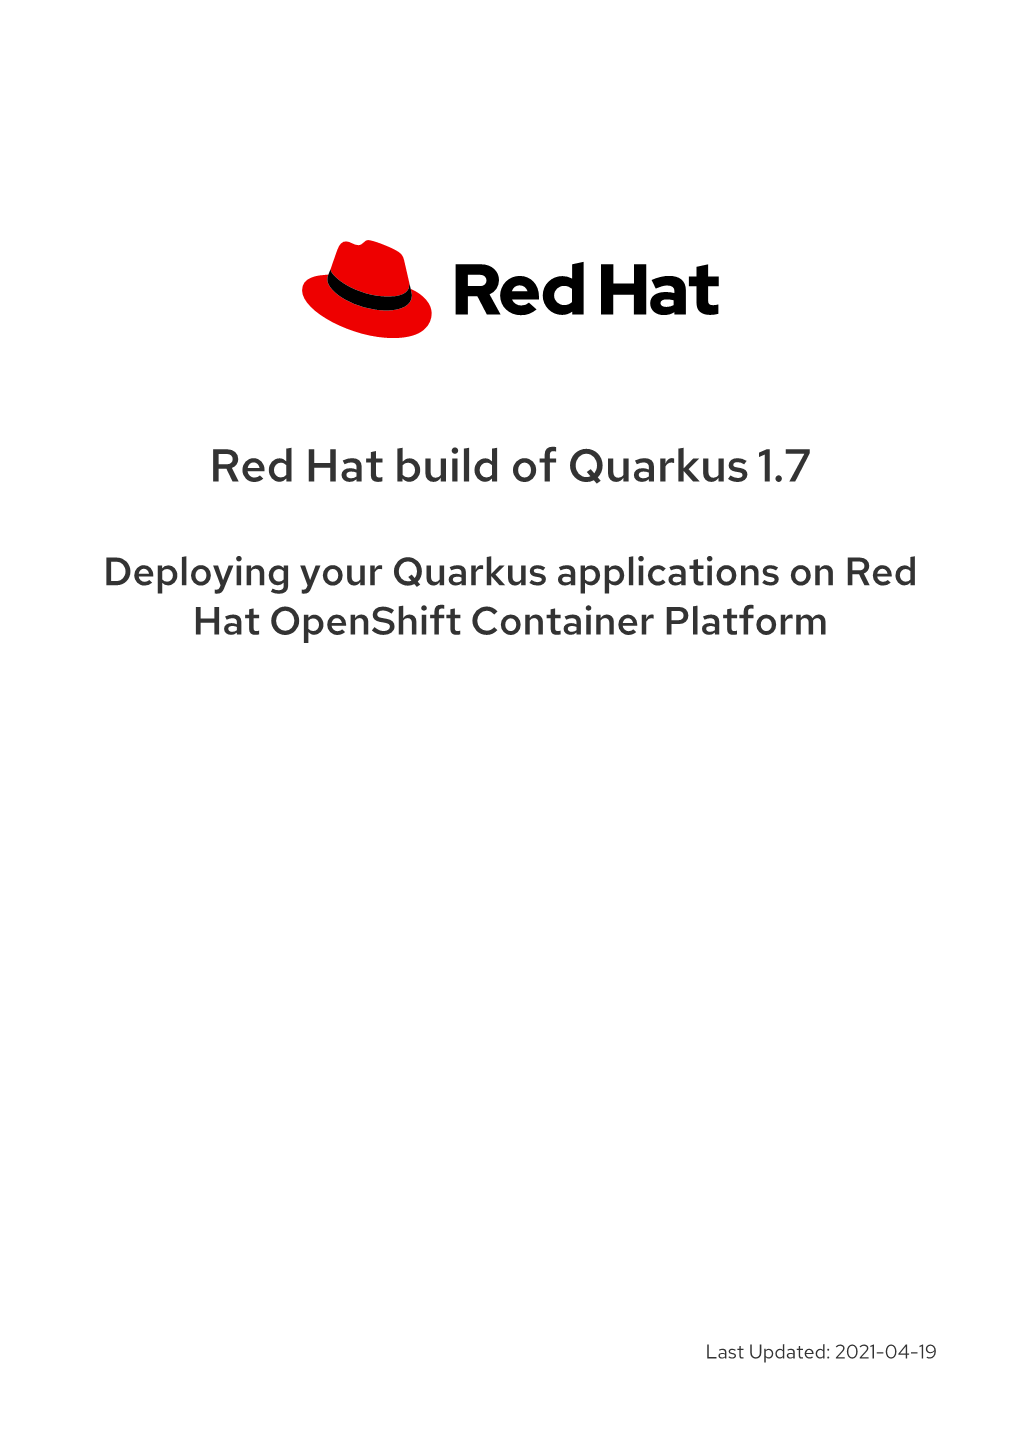 Deploying Your Quarkus Applications on Red Hat Openshift Container Platform